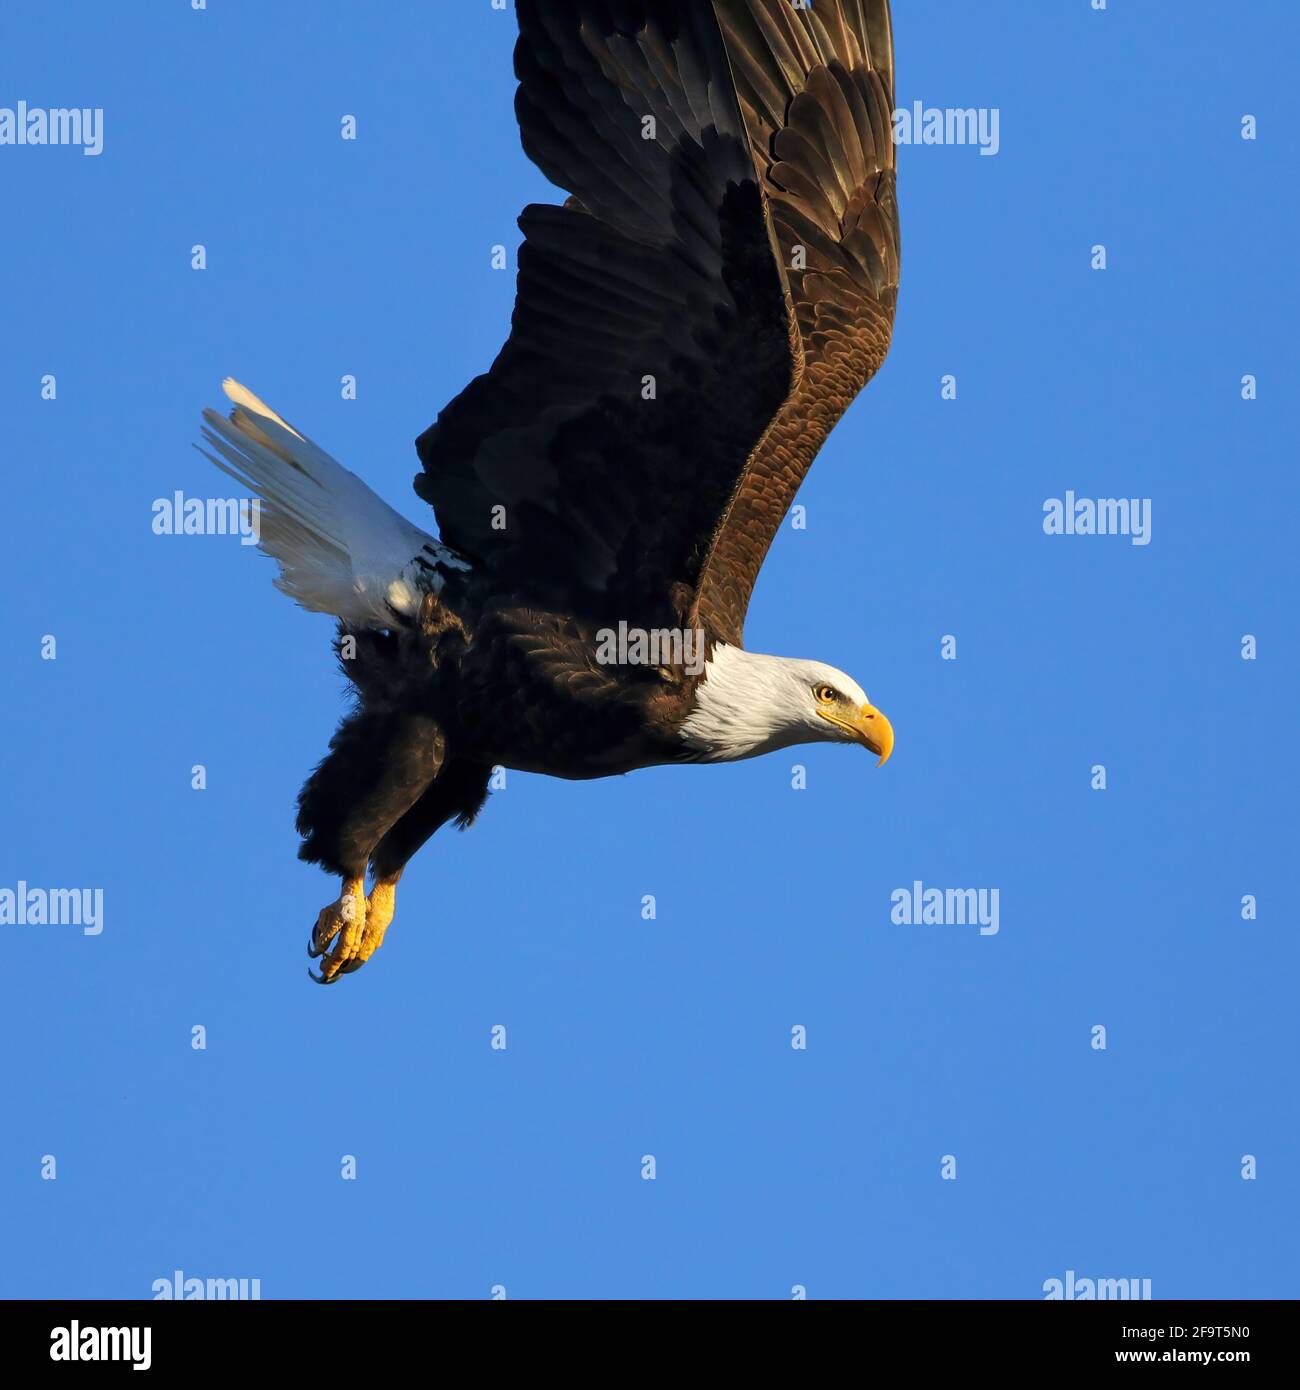 Close up of a Bald Eagle leaping high into the air as it begins its flight, with the afternoon sun shining upon it against a deep blue sky. Stock Photo